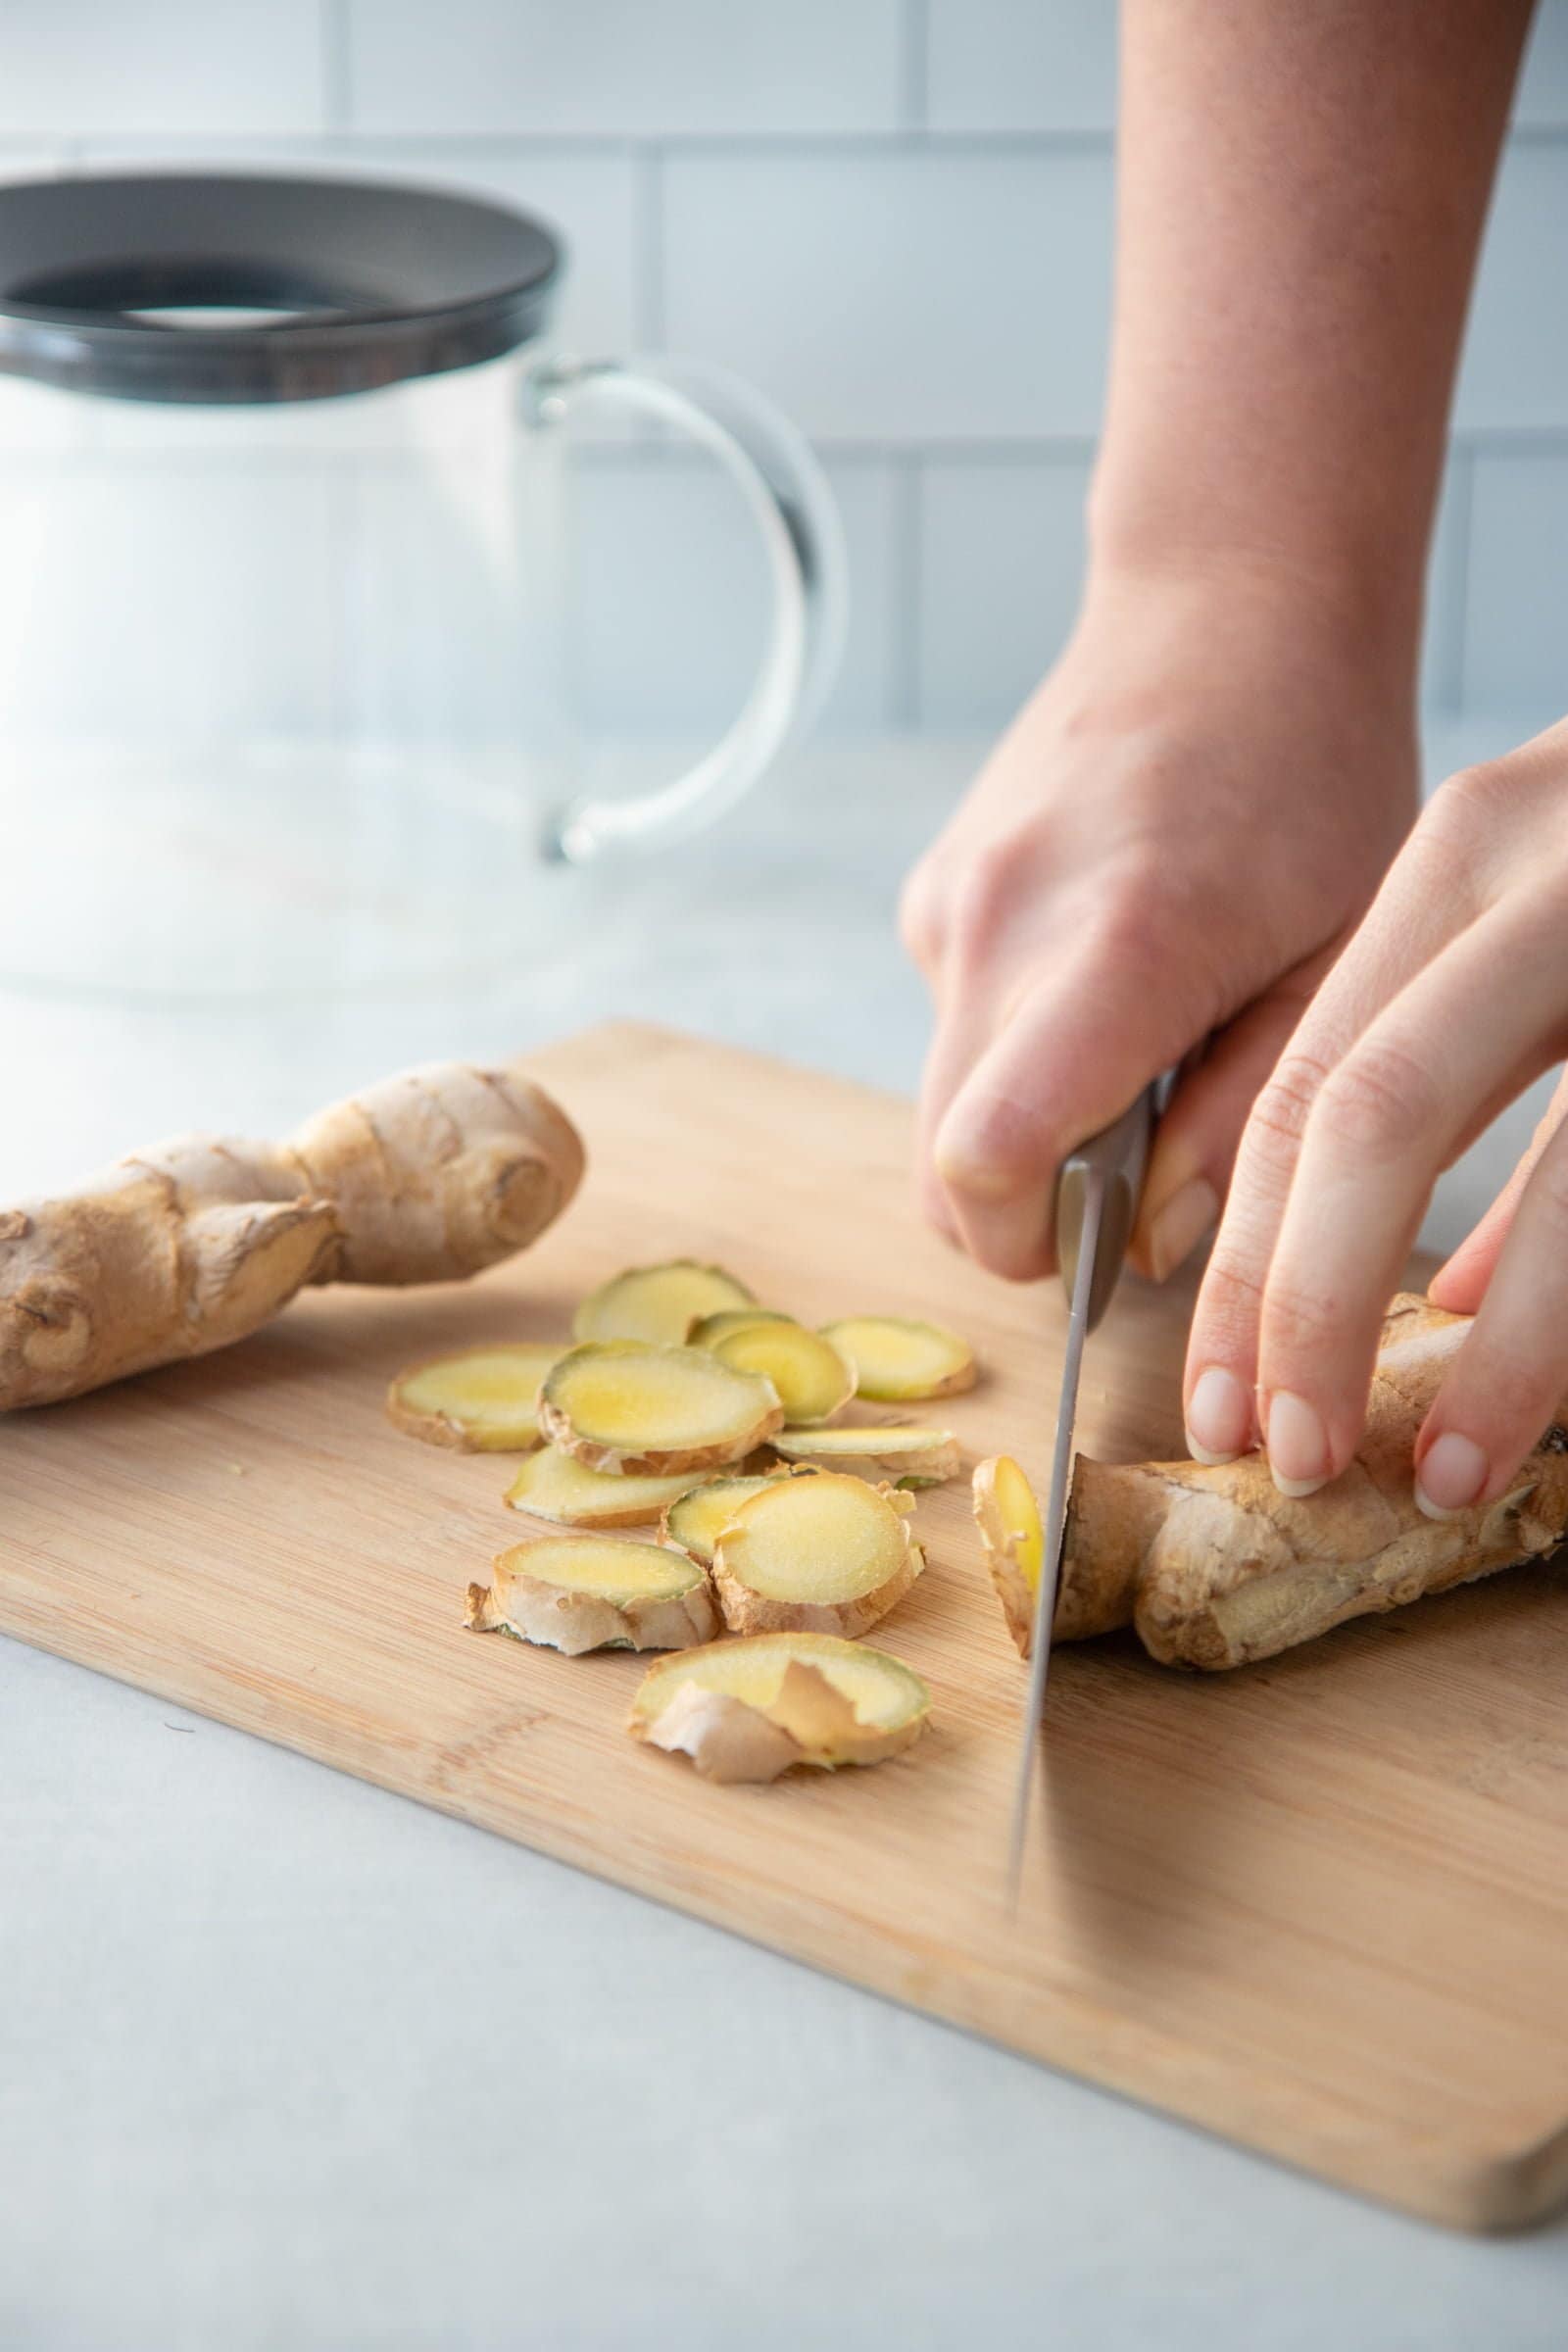 Hands slicing fresh ginger root on a wooden cutting board.